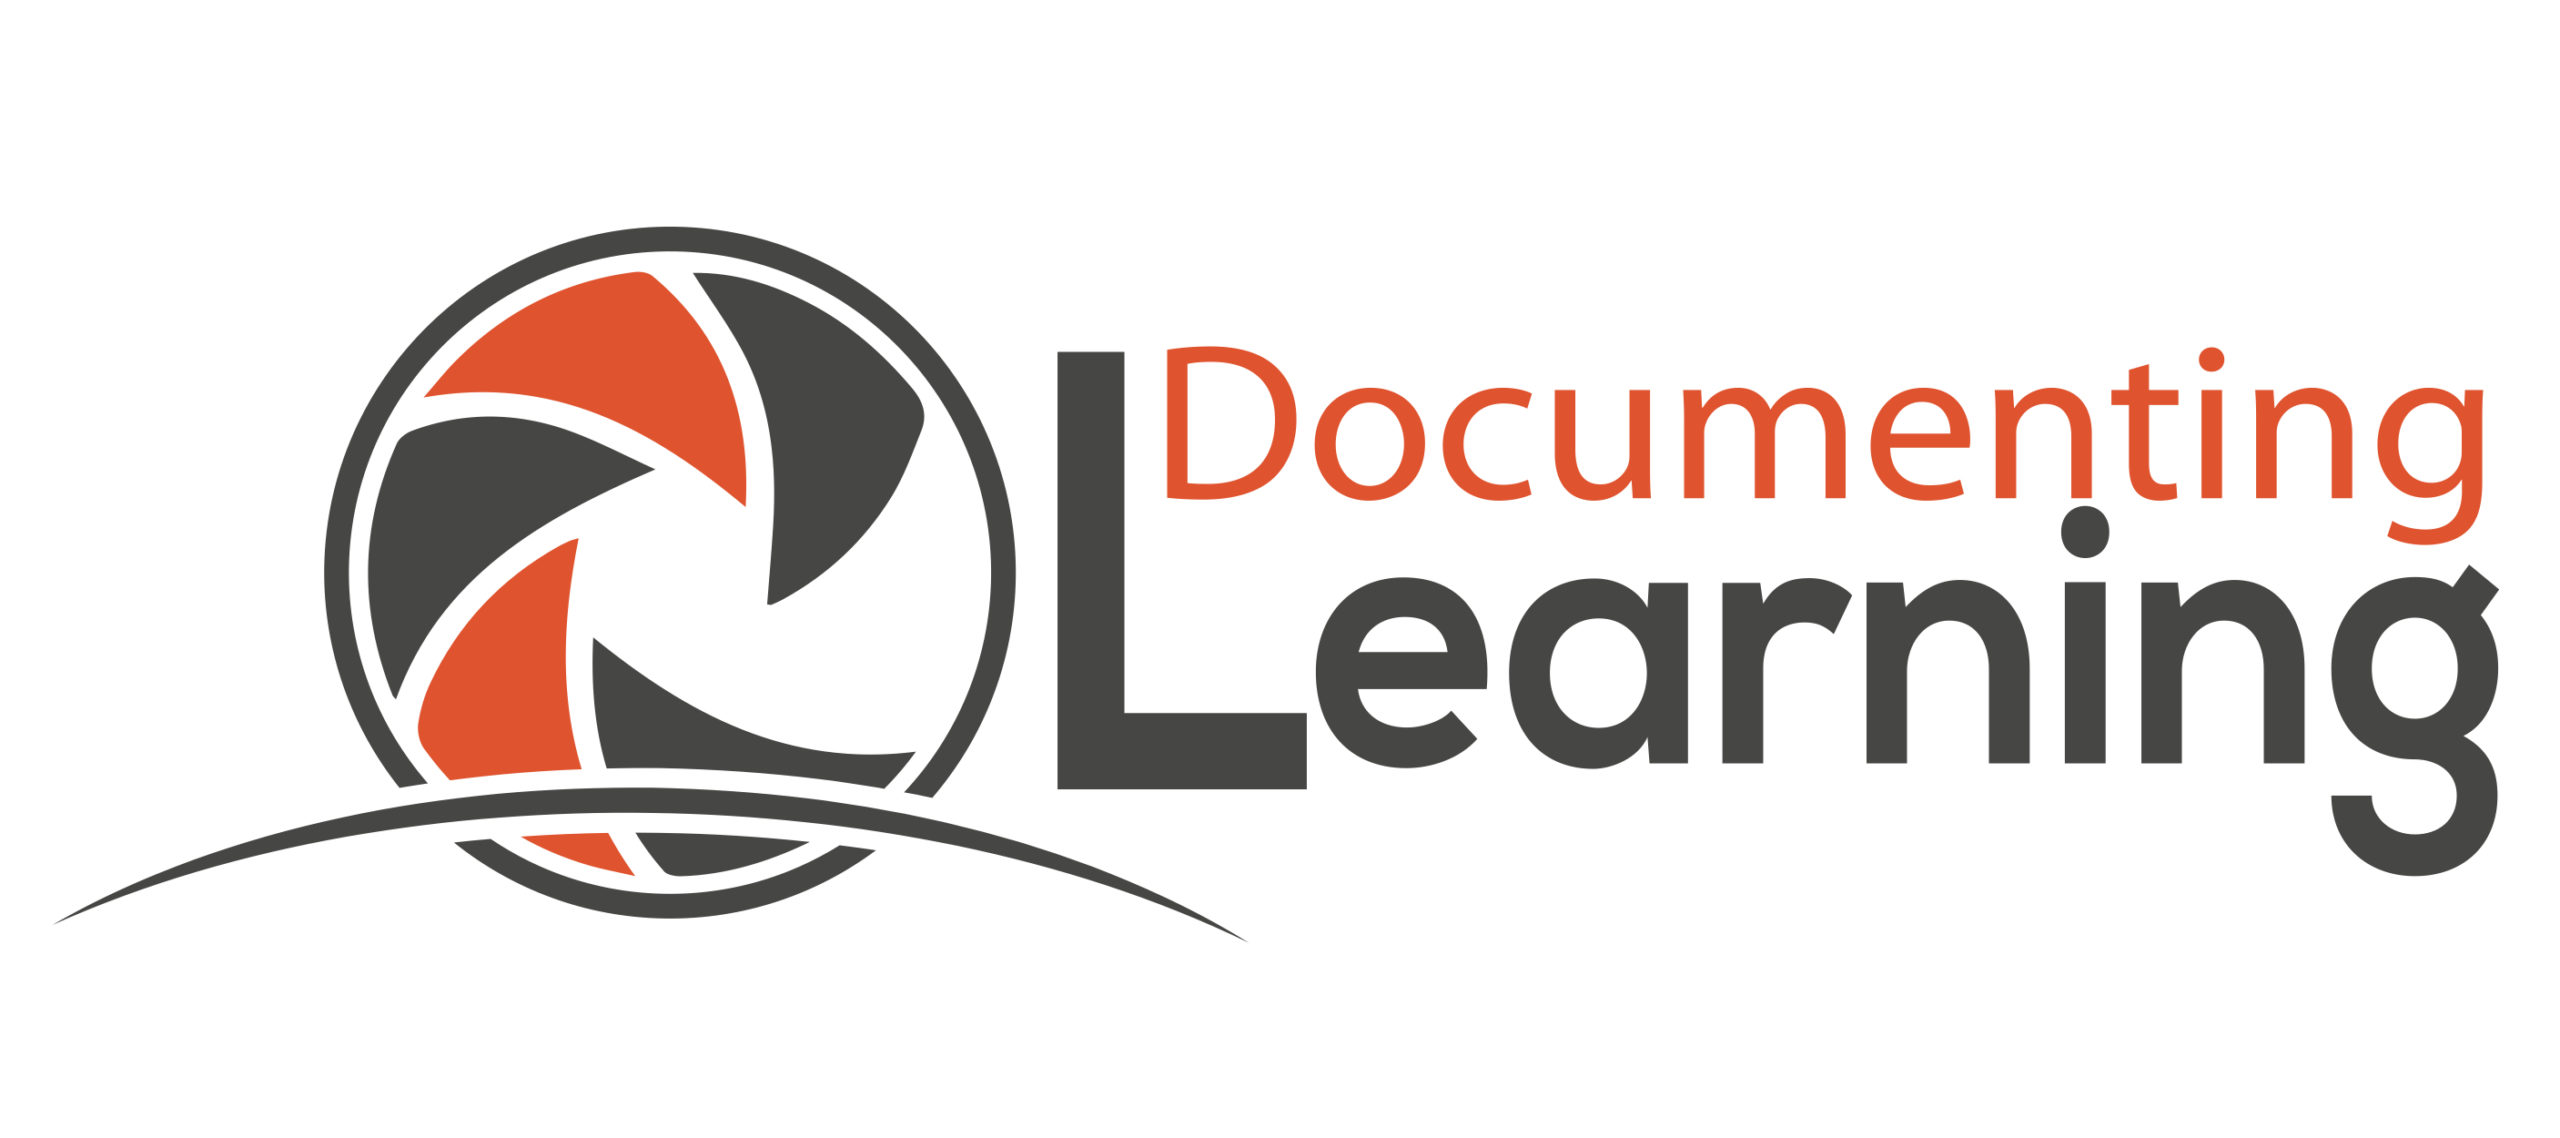 Documenting4learning